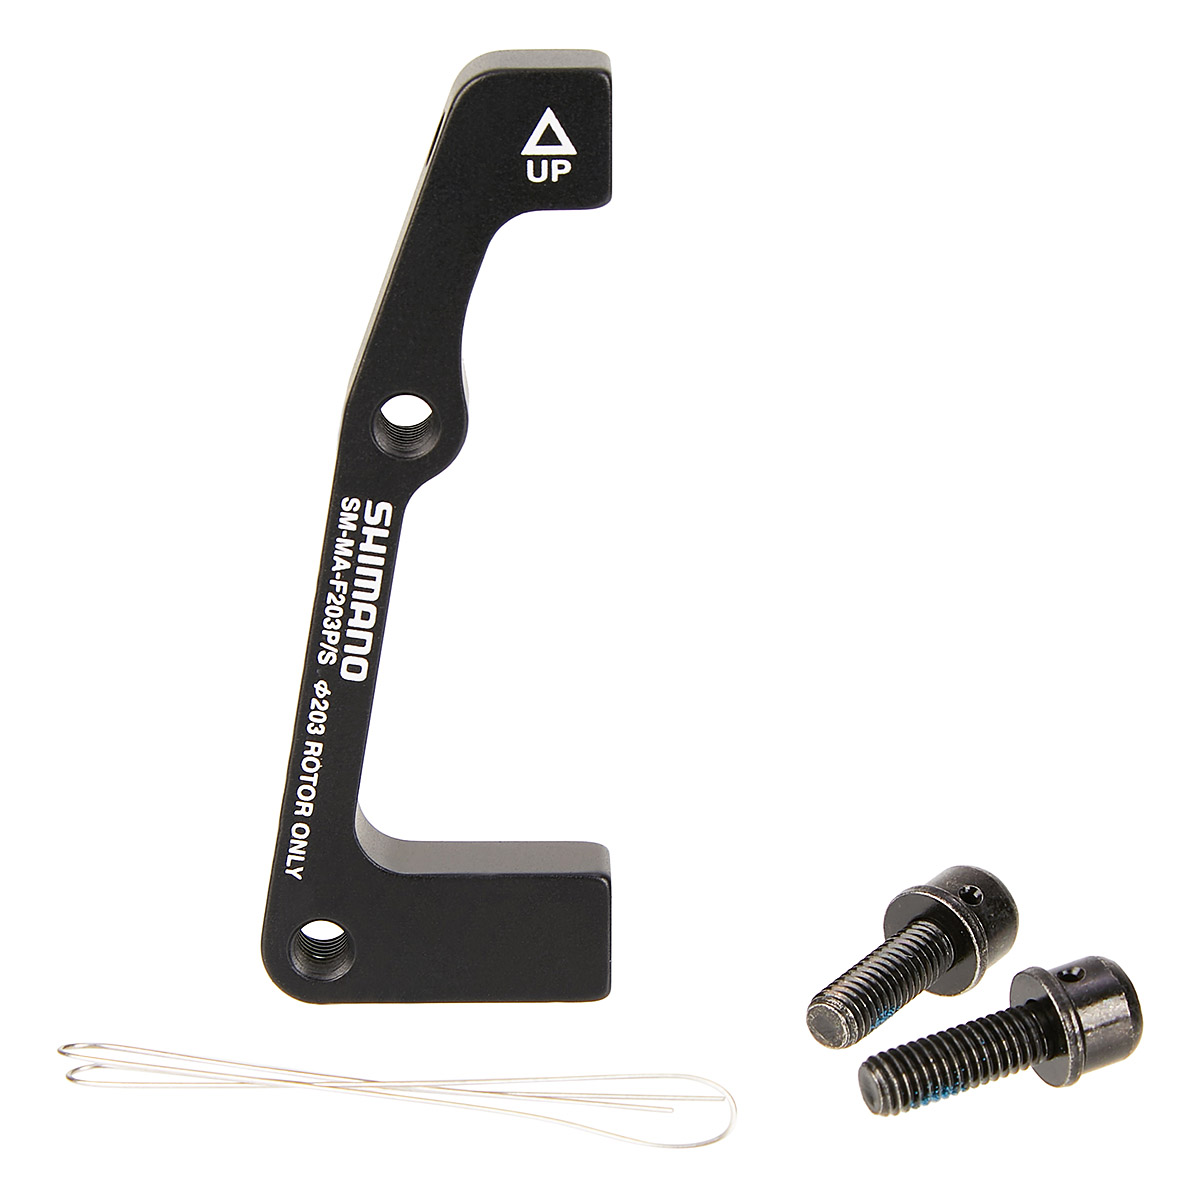 Shimano Adattatore  for PM-Brake/IS-Fork, for 203mm, for BR-M 966,765,585